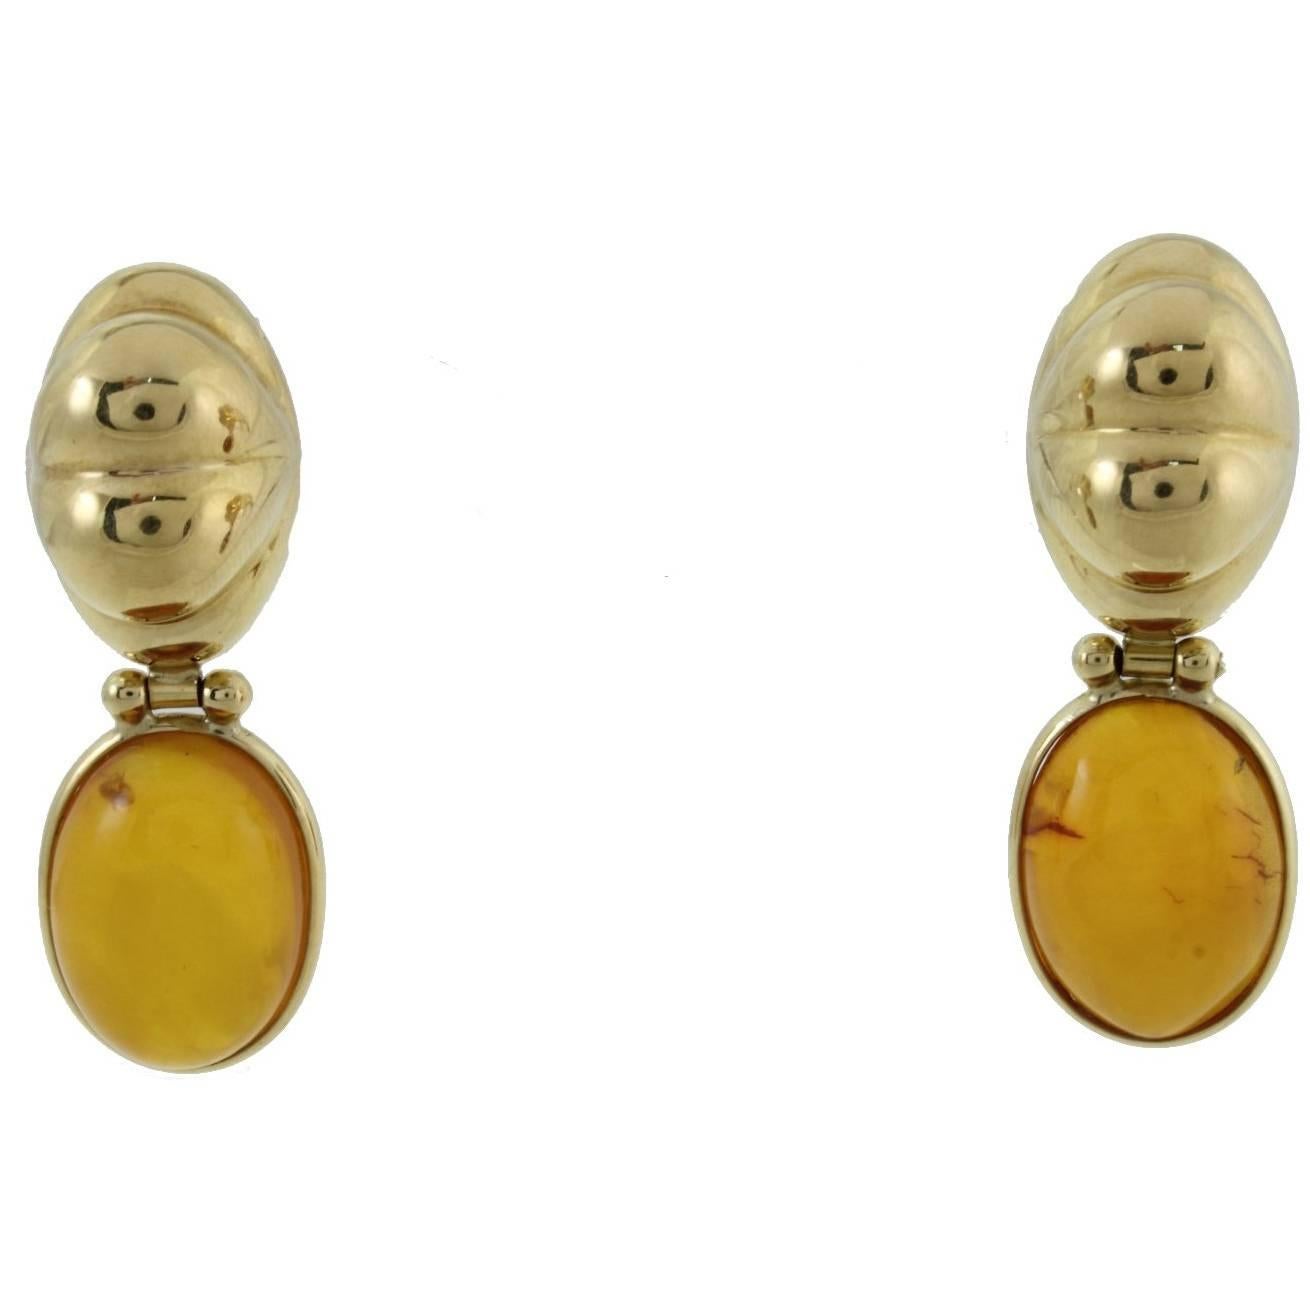 SHIPPING POLICY: 
No additional costs will be added to this order. 
Shipping costs will be totally covered by the seller (customs duties included).

Stud earrings in 18k  yellow gold mounted with amber.
Amber 3.60 gr
Tot.Weight 10.40 gr
R.F icc

For